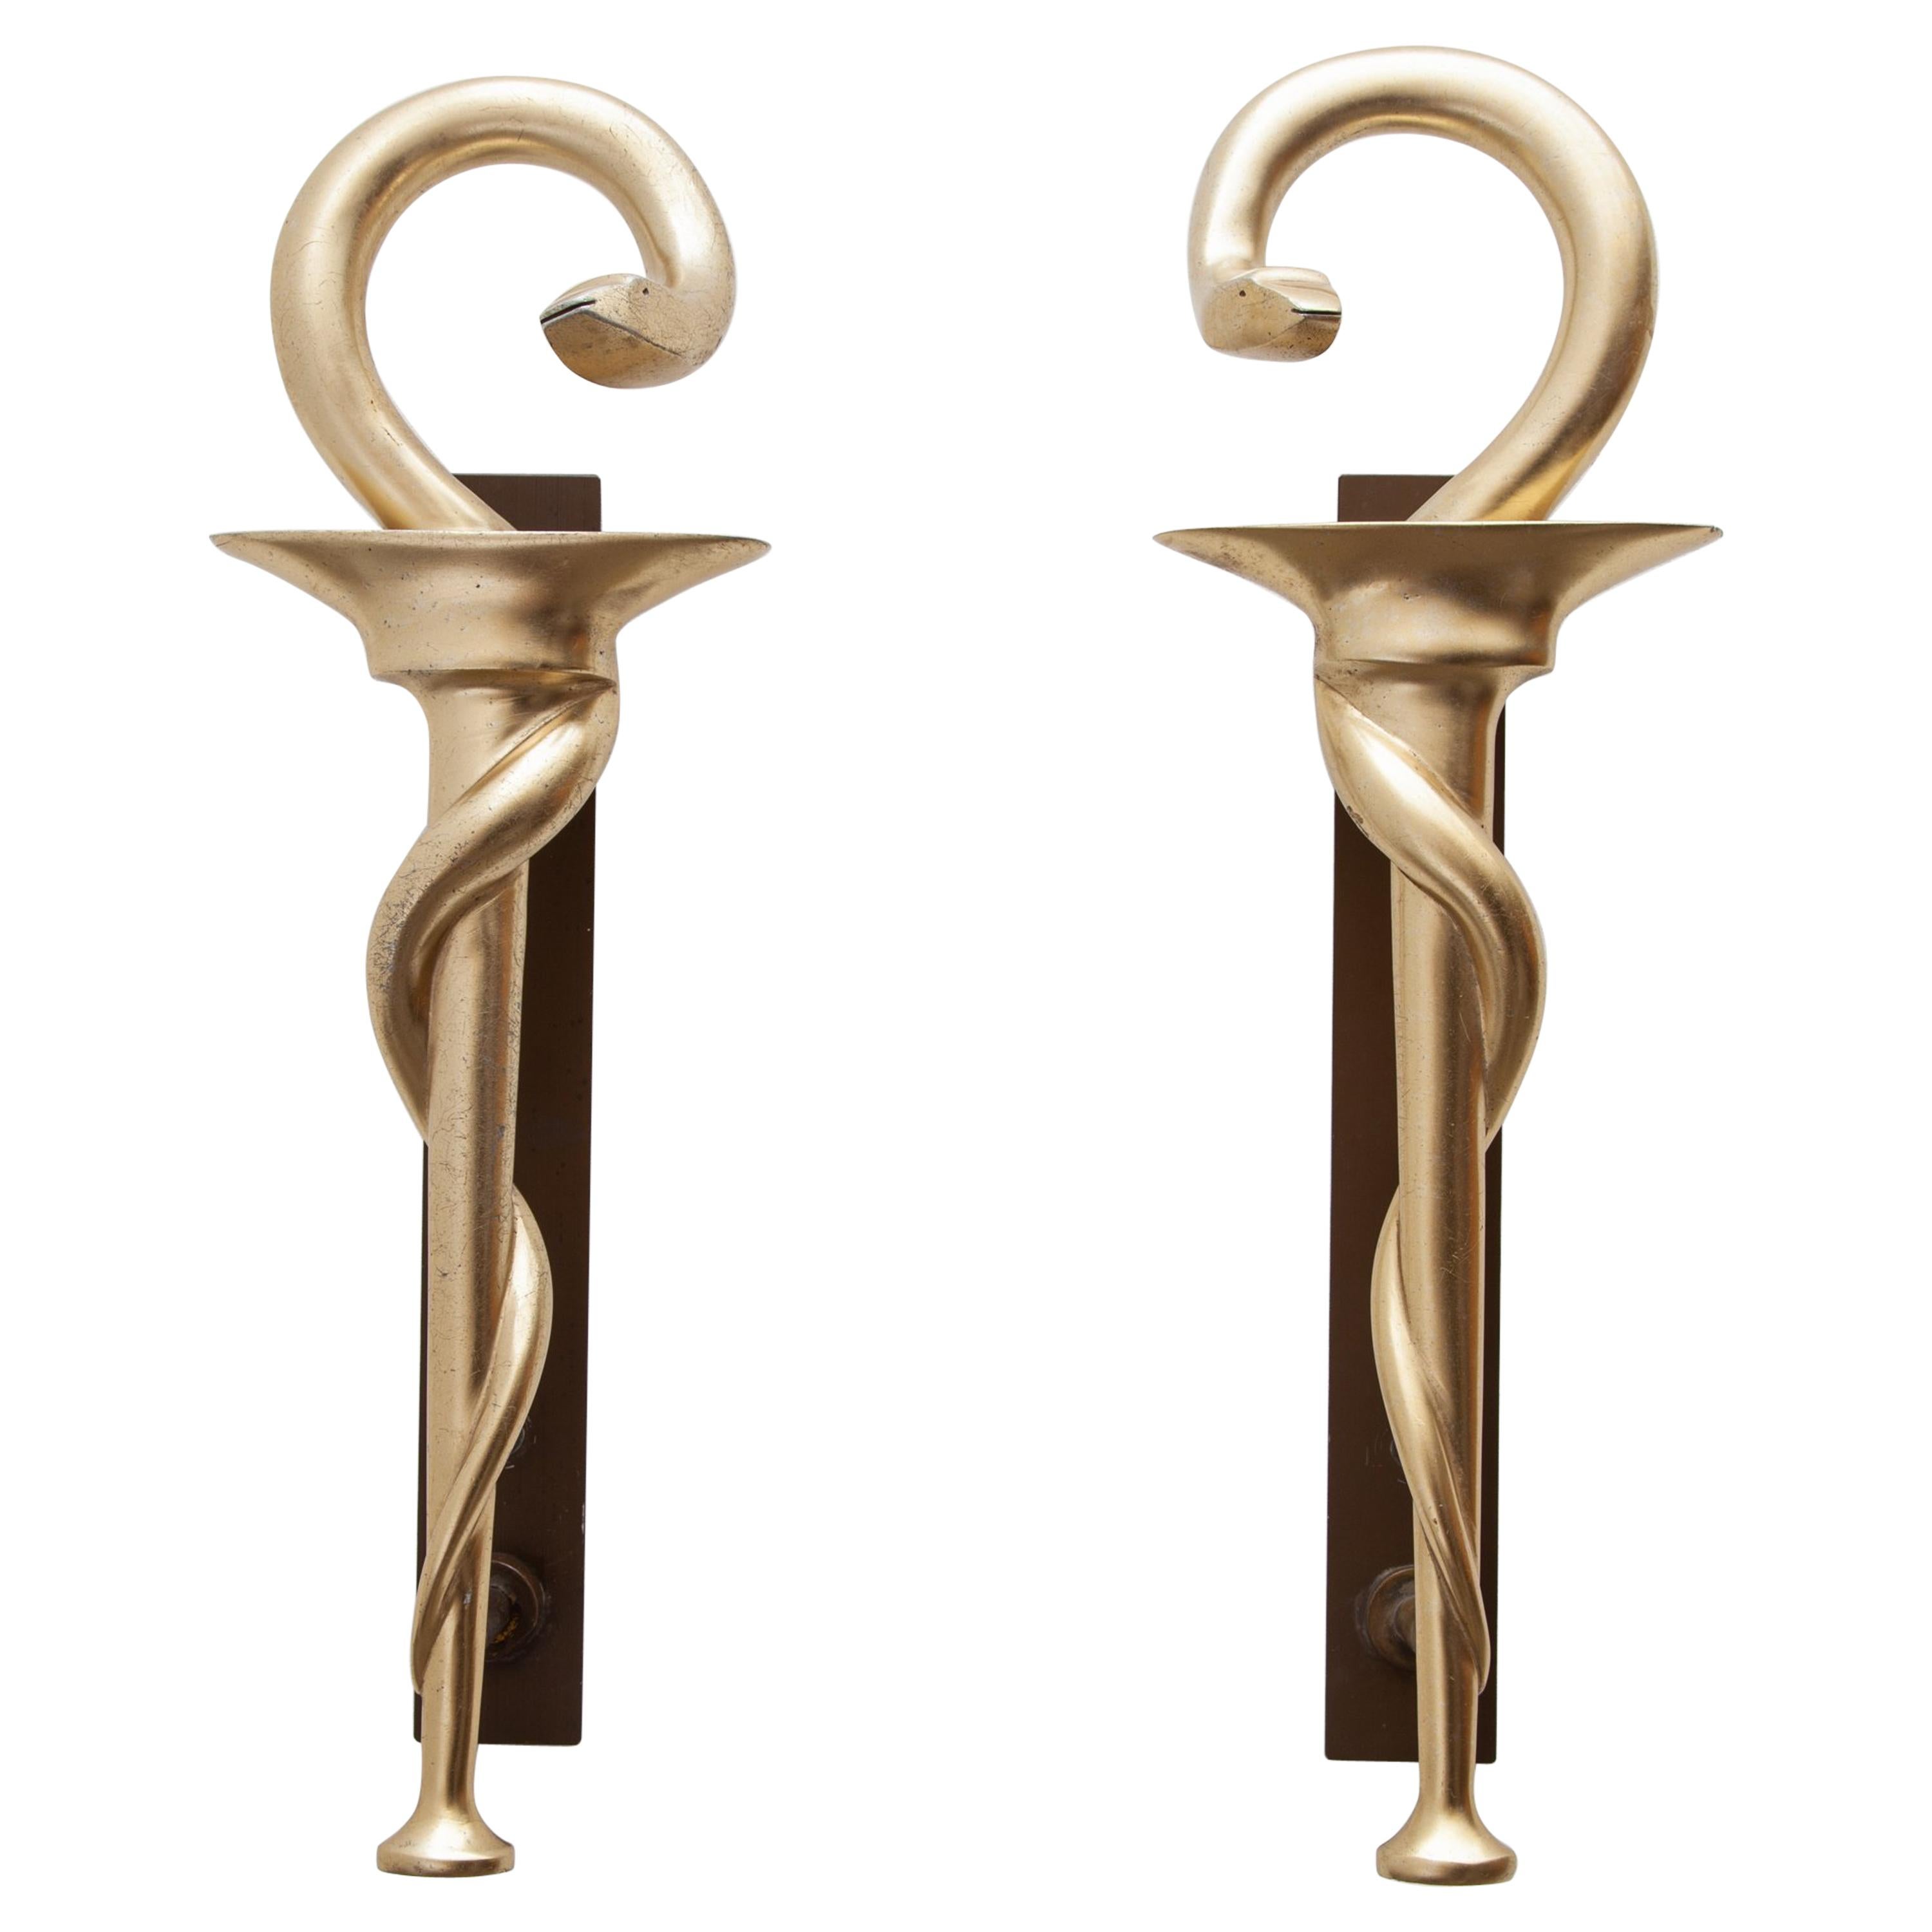 Set of Two Pharmacy Icon with Caduceus Symbol Door Handles for Apothecary, 1970s